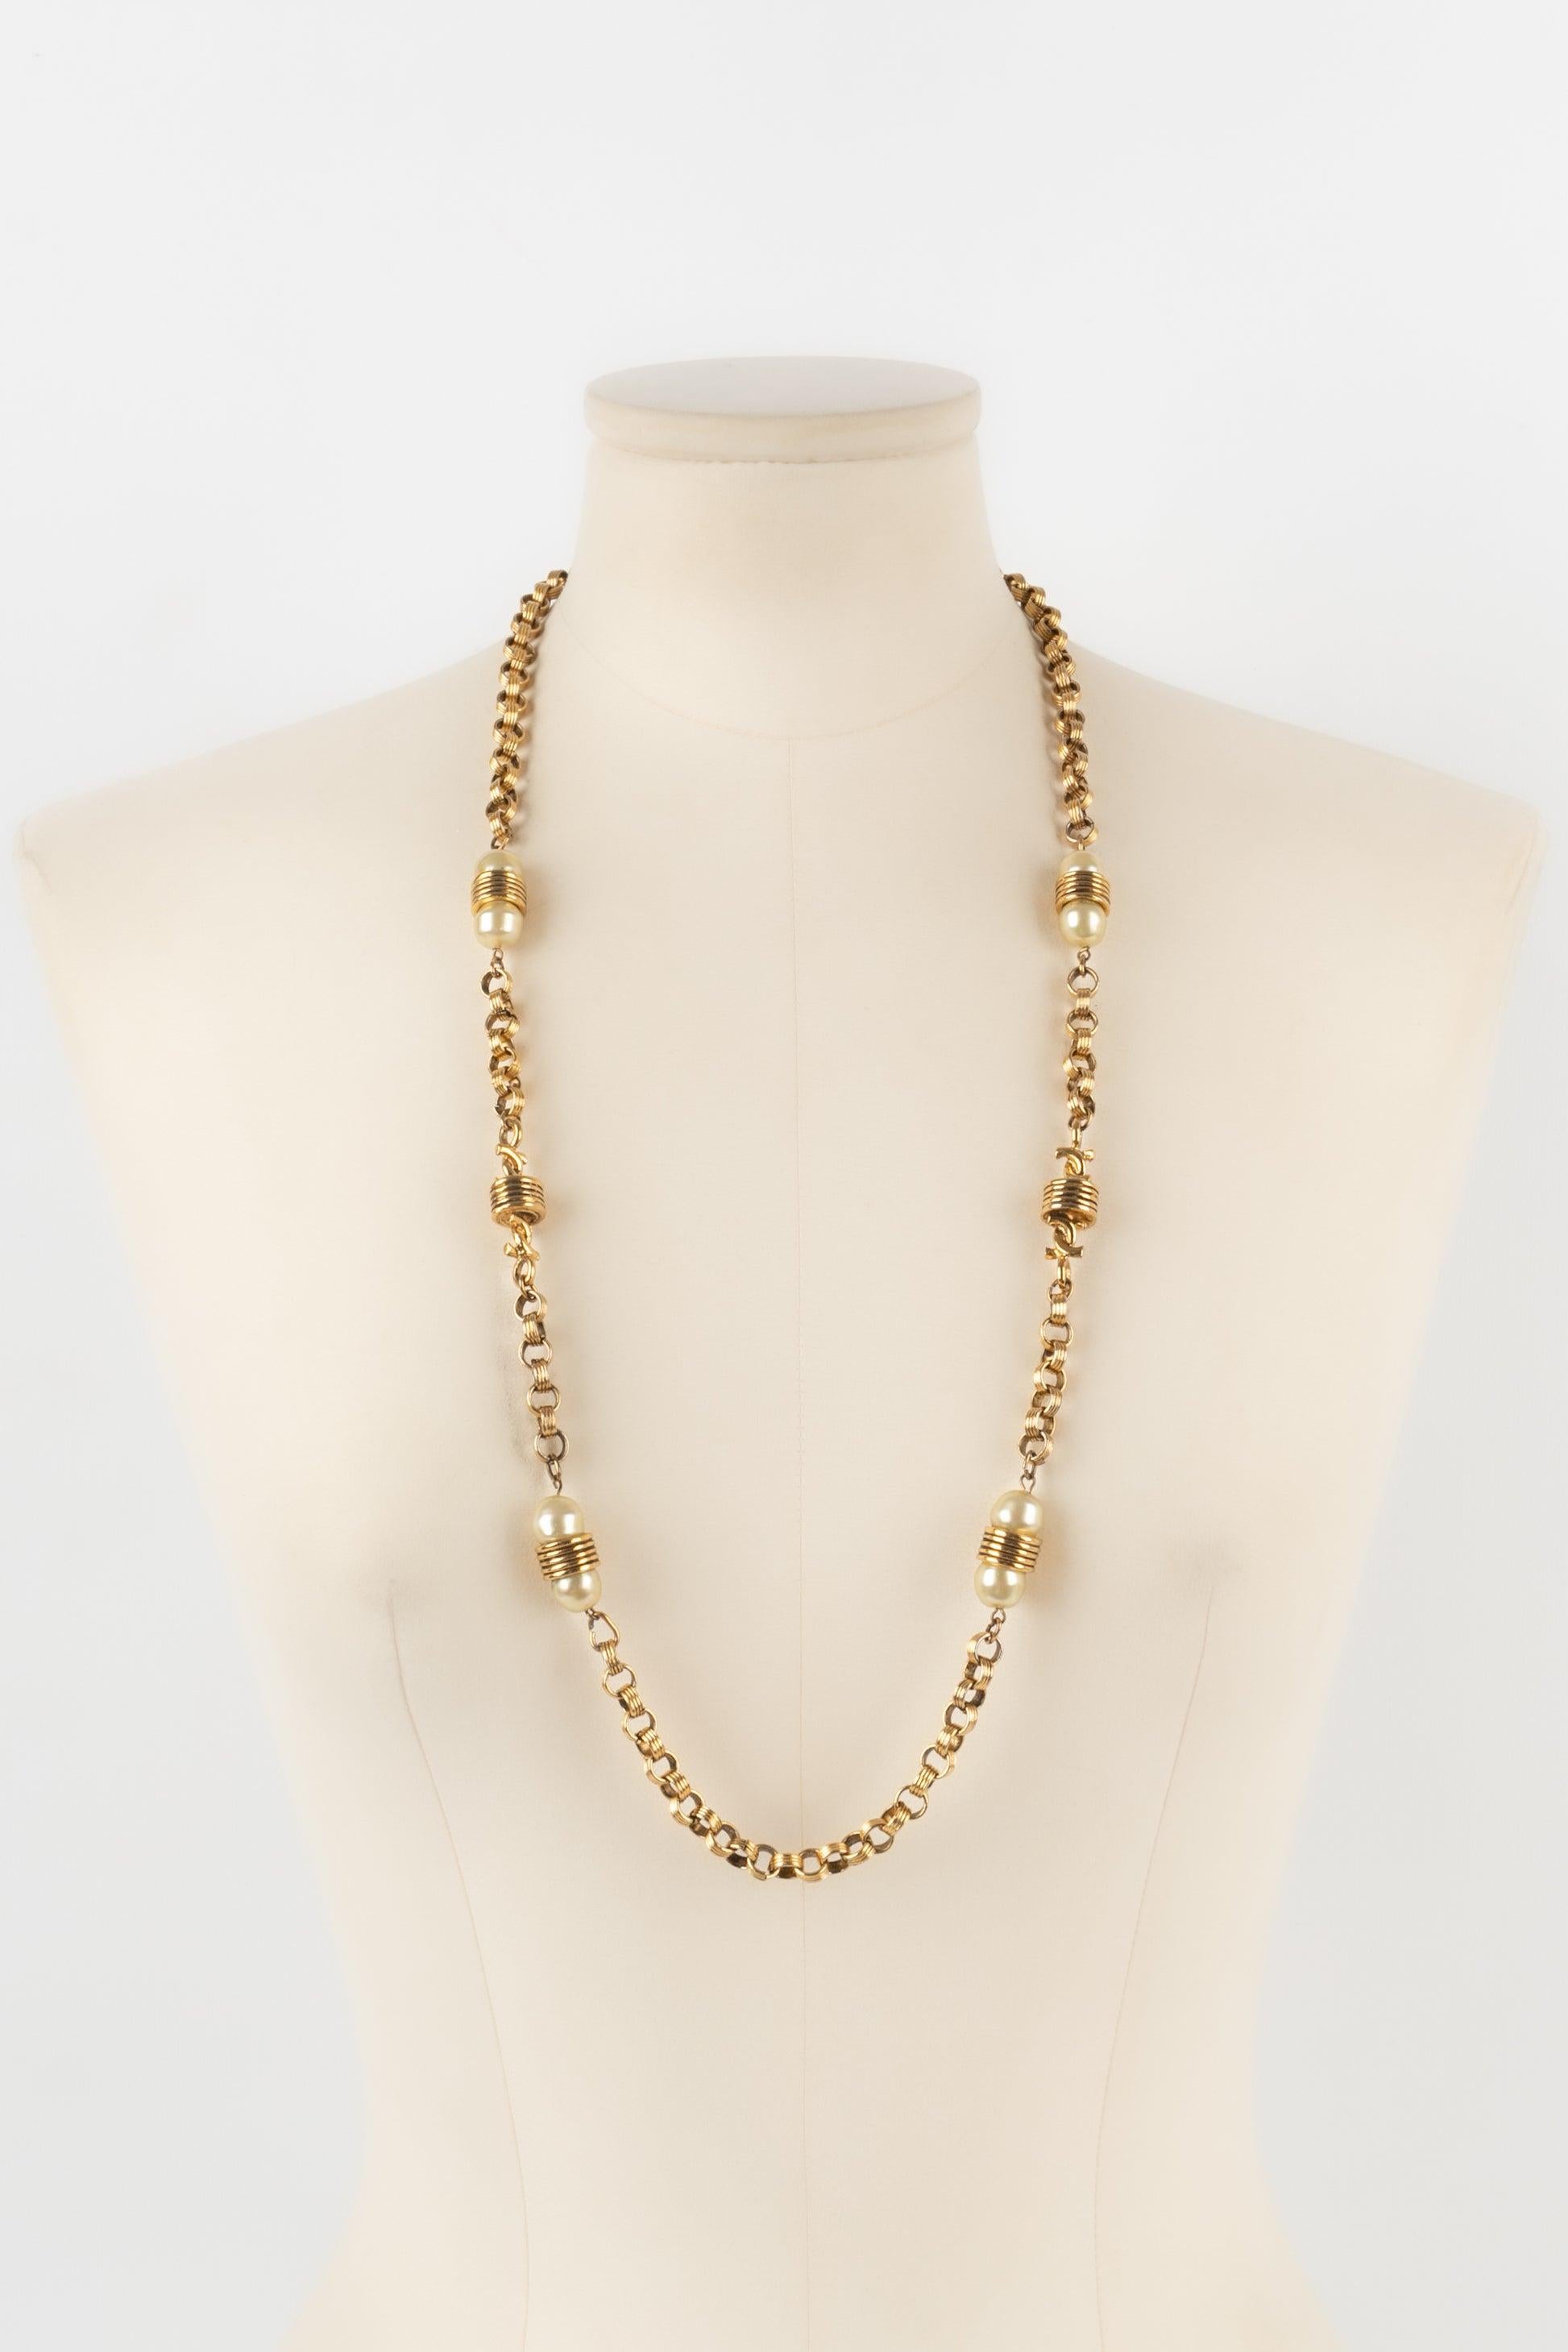 Chanel Golden Metal Necklace with Costume Pearls, 1980s For Sale 3